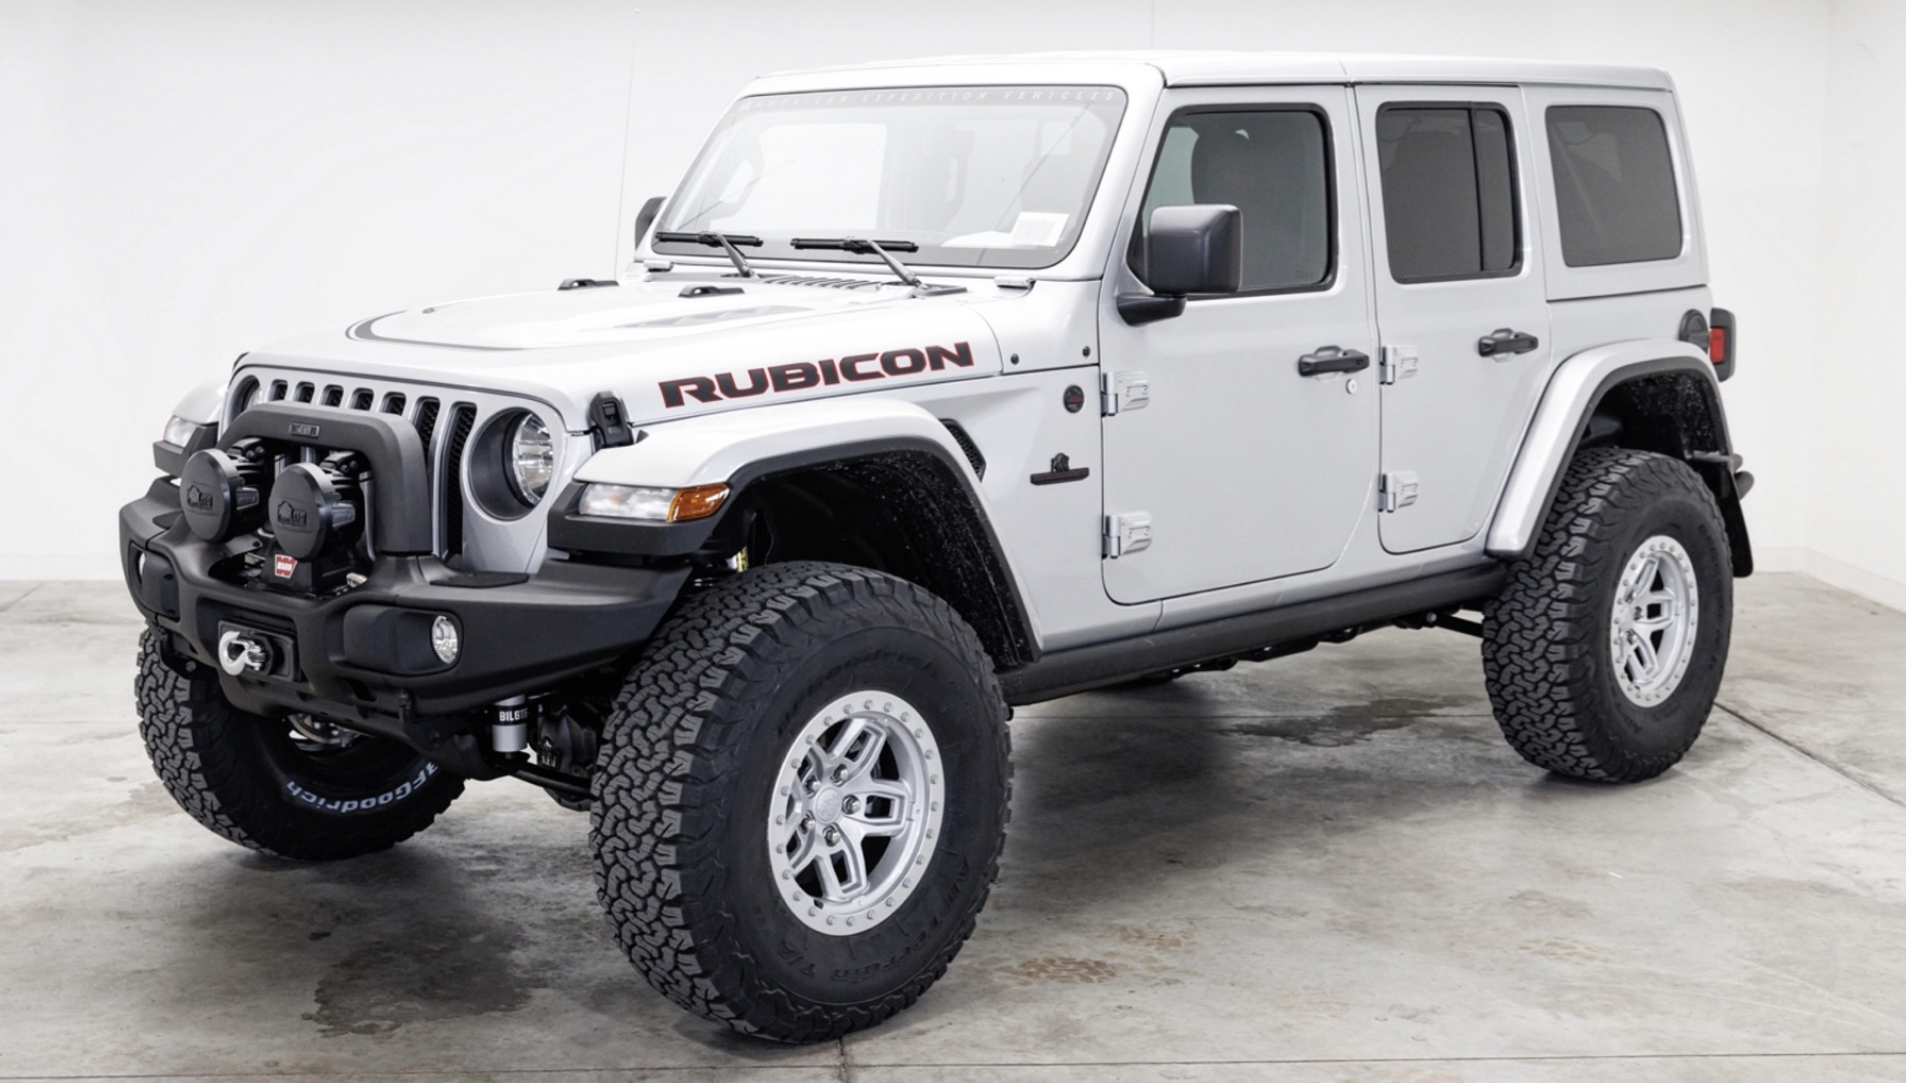 American Expedition Vehicles Debuts Turnkey Jeep Builds | THE SHOP